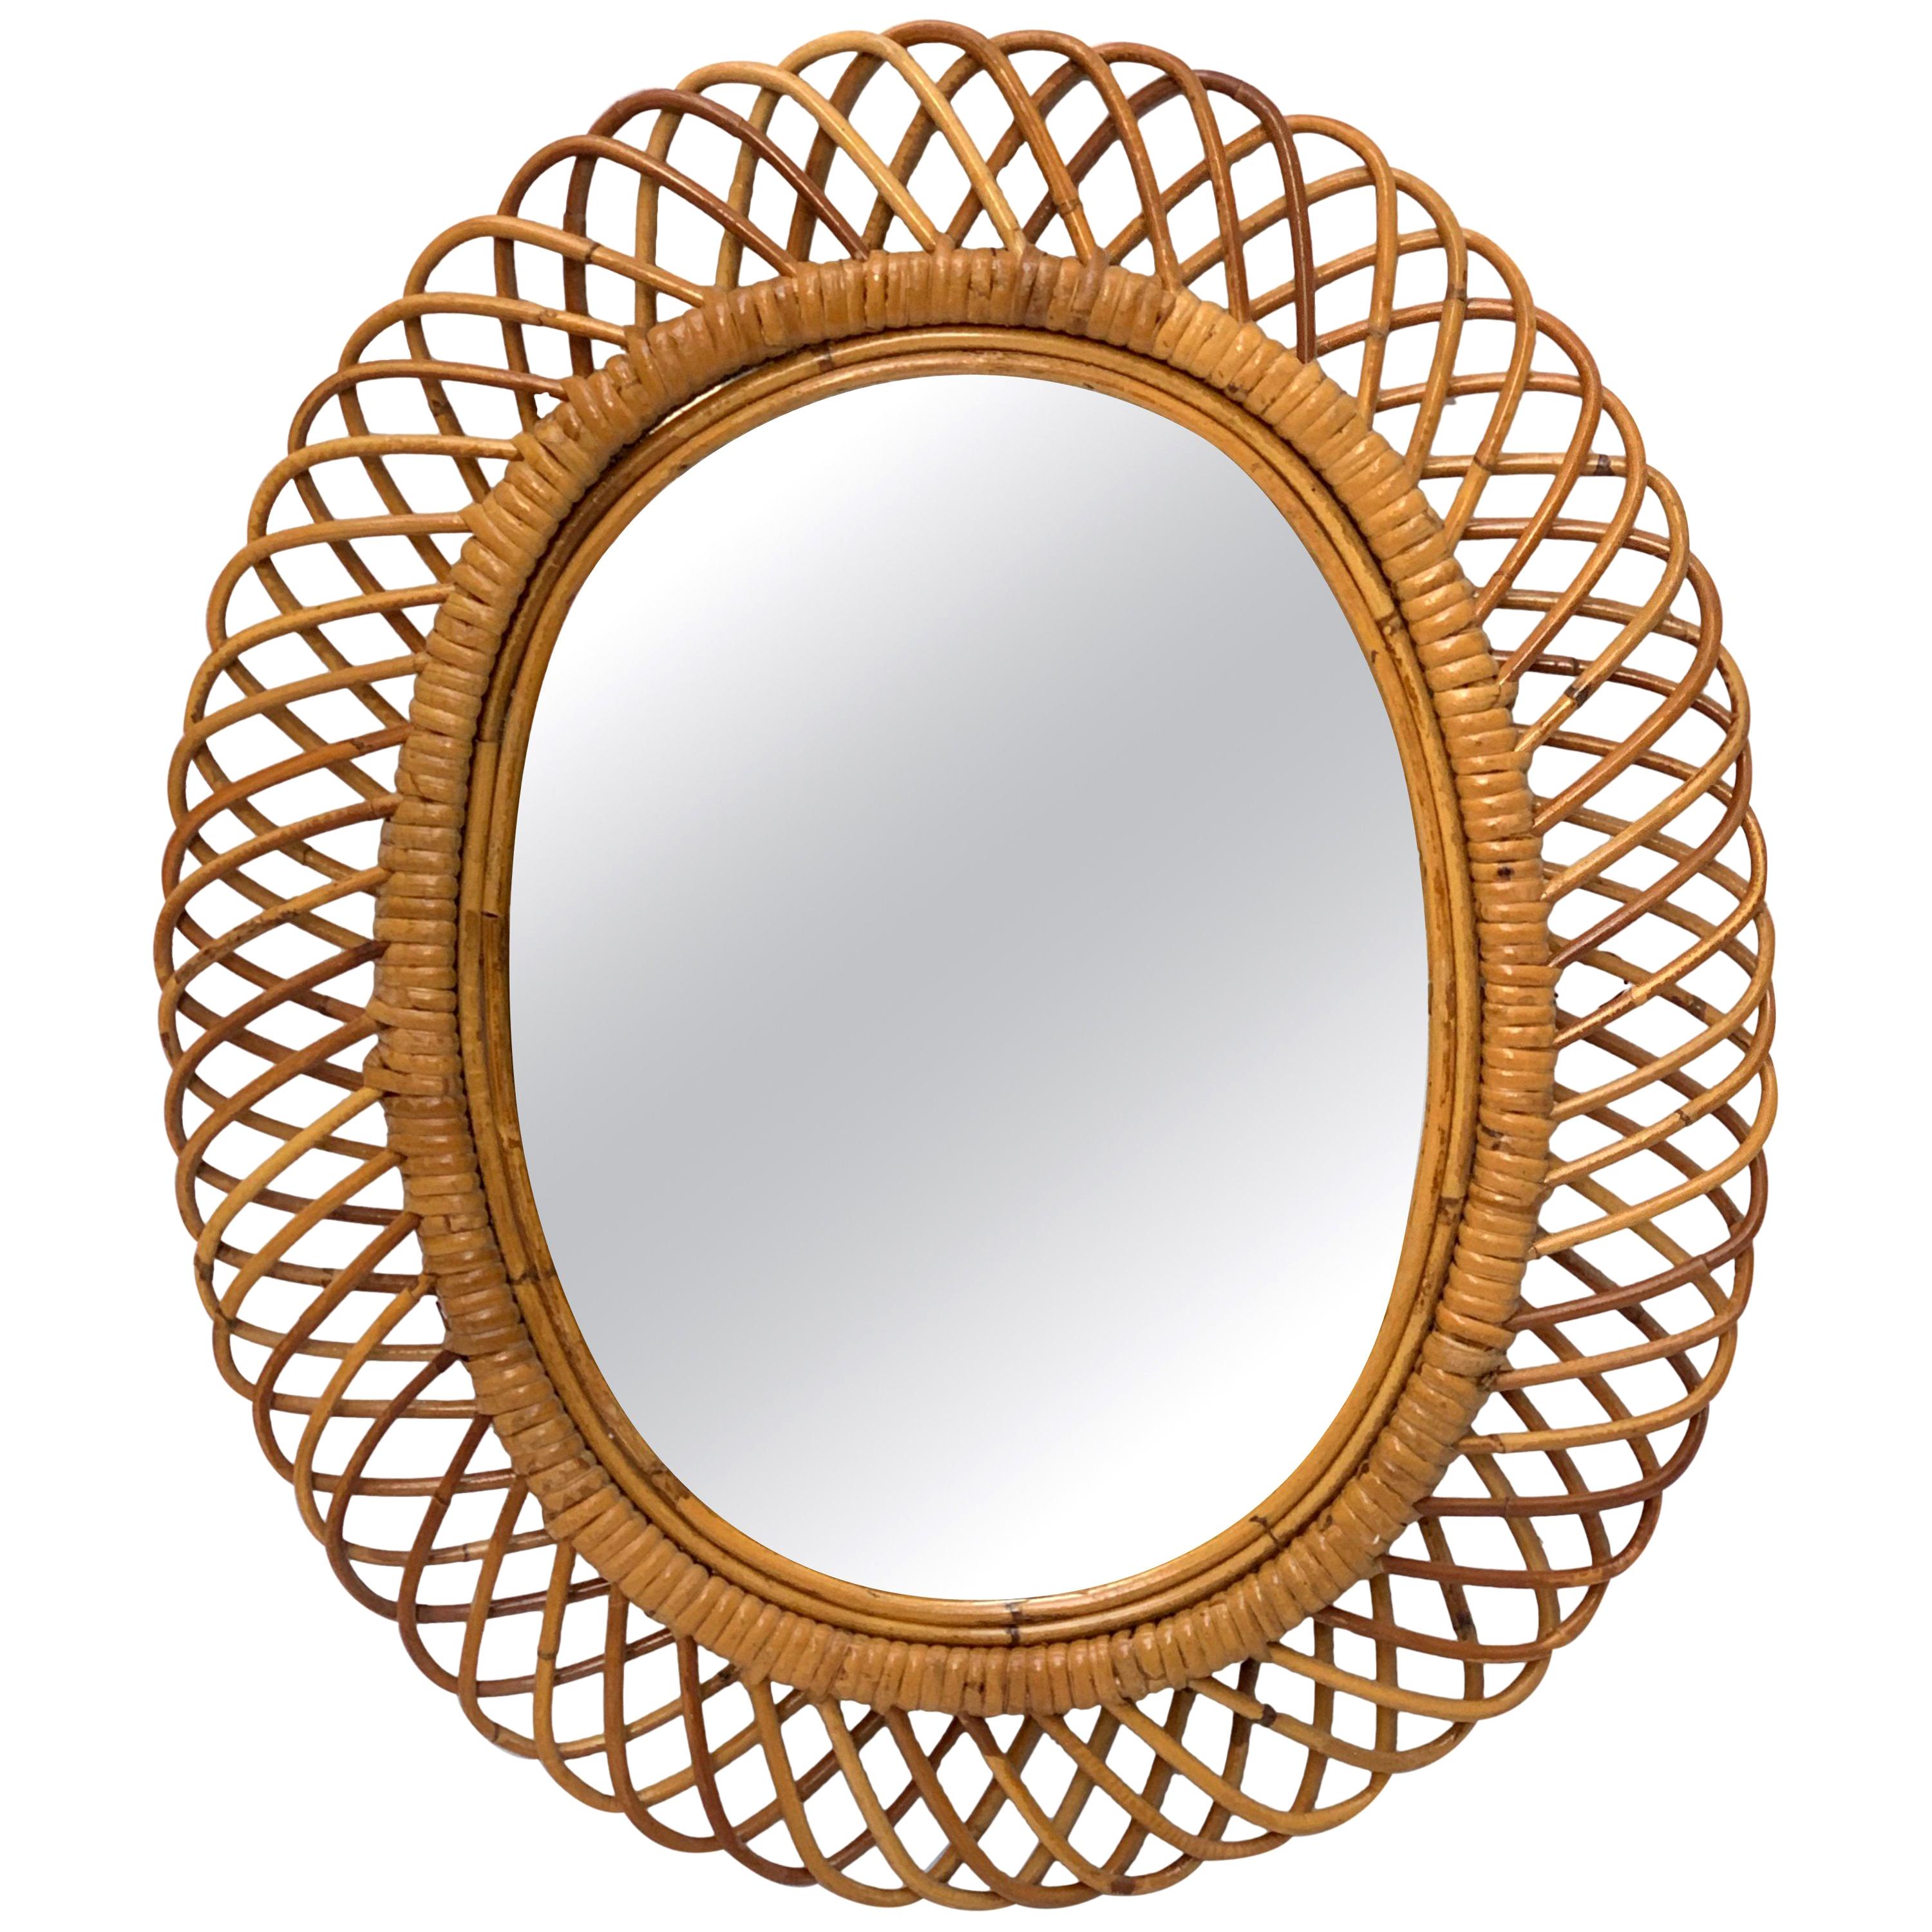 Midcentury French Riviera Rattan and Bamboo Italian Oval Mirror, 1960s